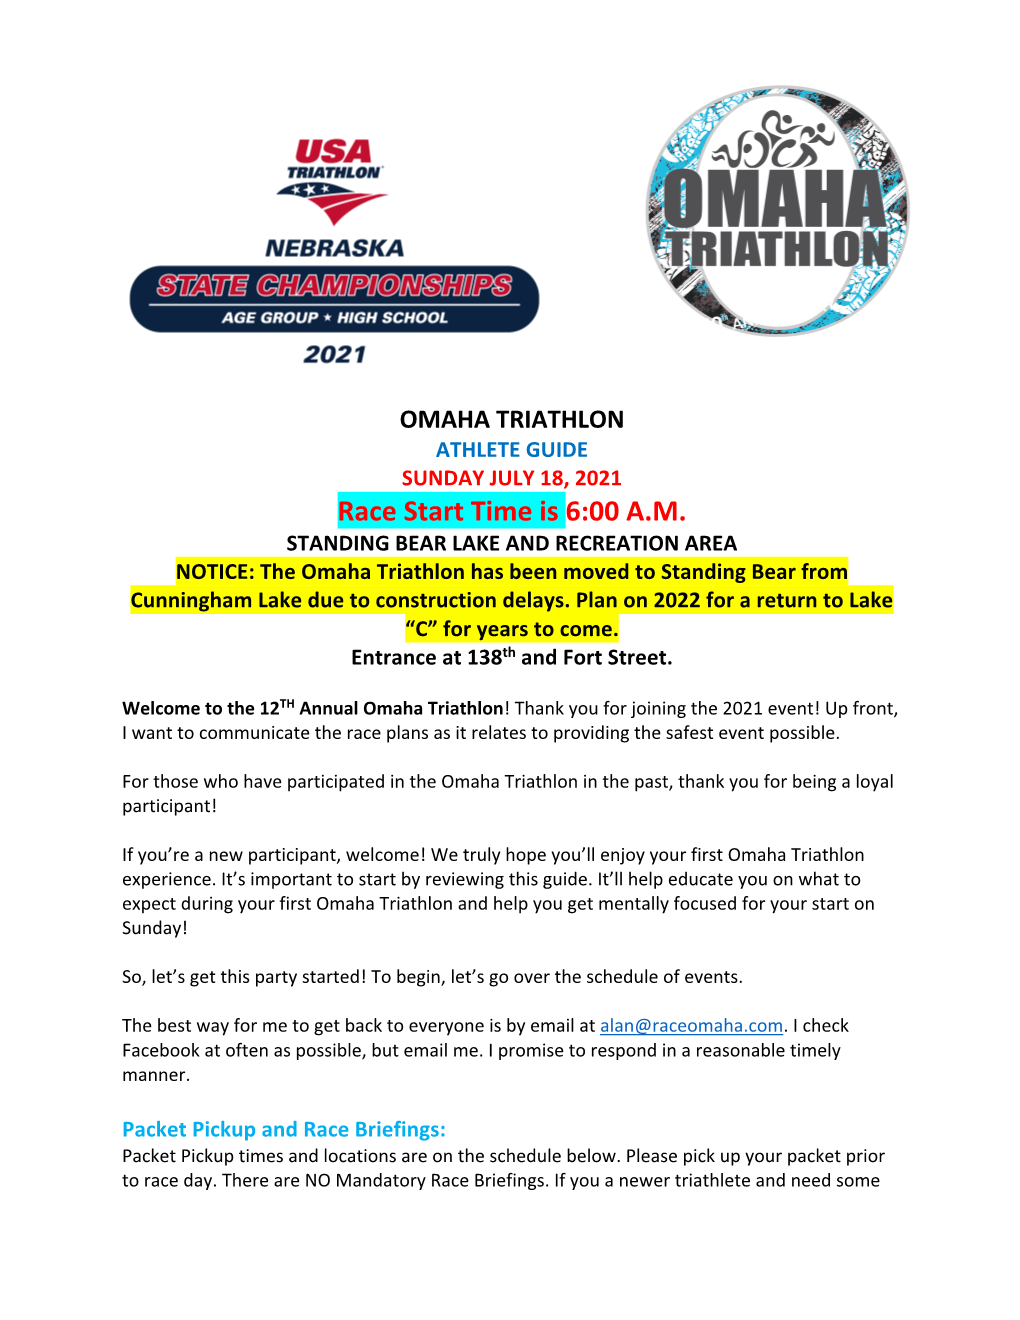 OMAHA TRIATHLON ATHLETE GUIDE SUNDAY JULY 18, 2021 Race Start Time Is 6:00 A.M